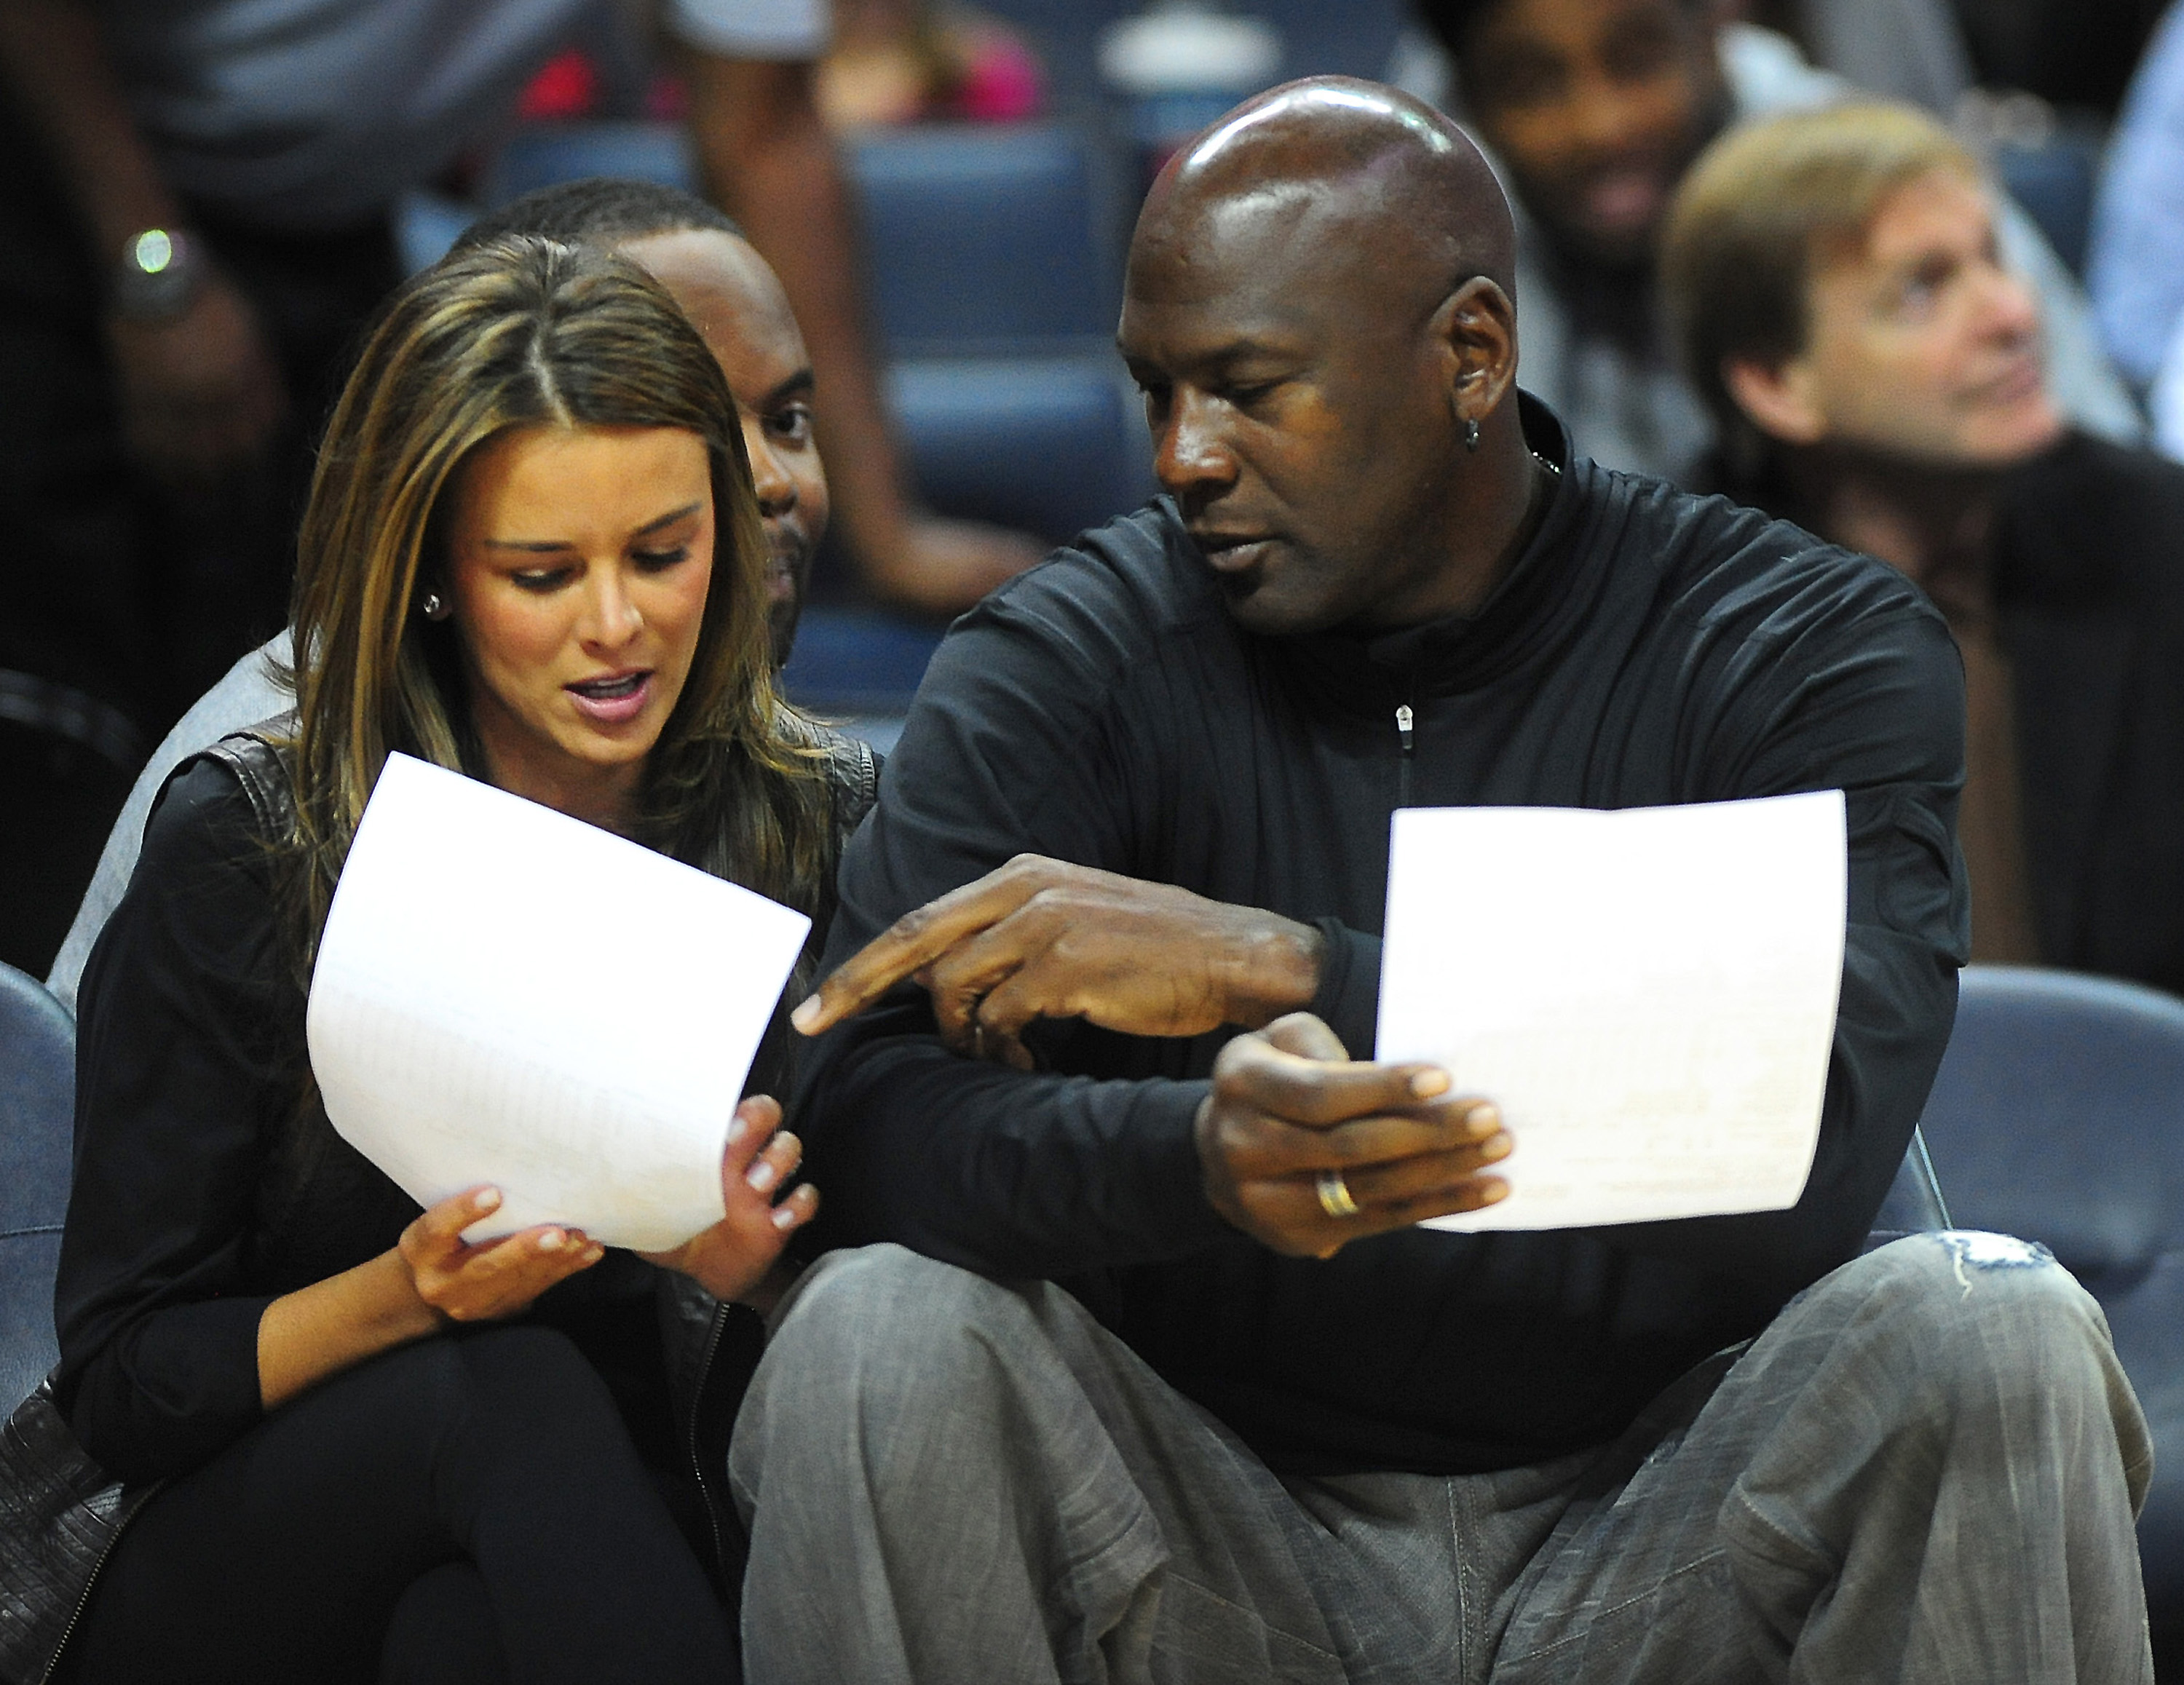 Michael Jordan and Yvette Prieto during a game on January 16, 2012 in Charlotte, North Carolina | Source: Getty Images